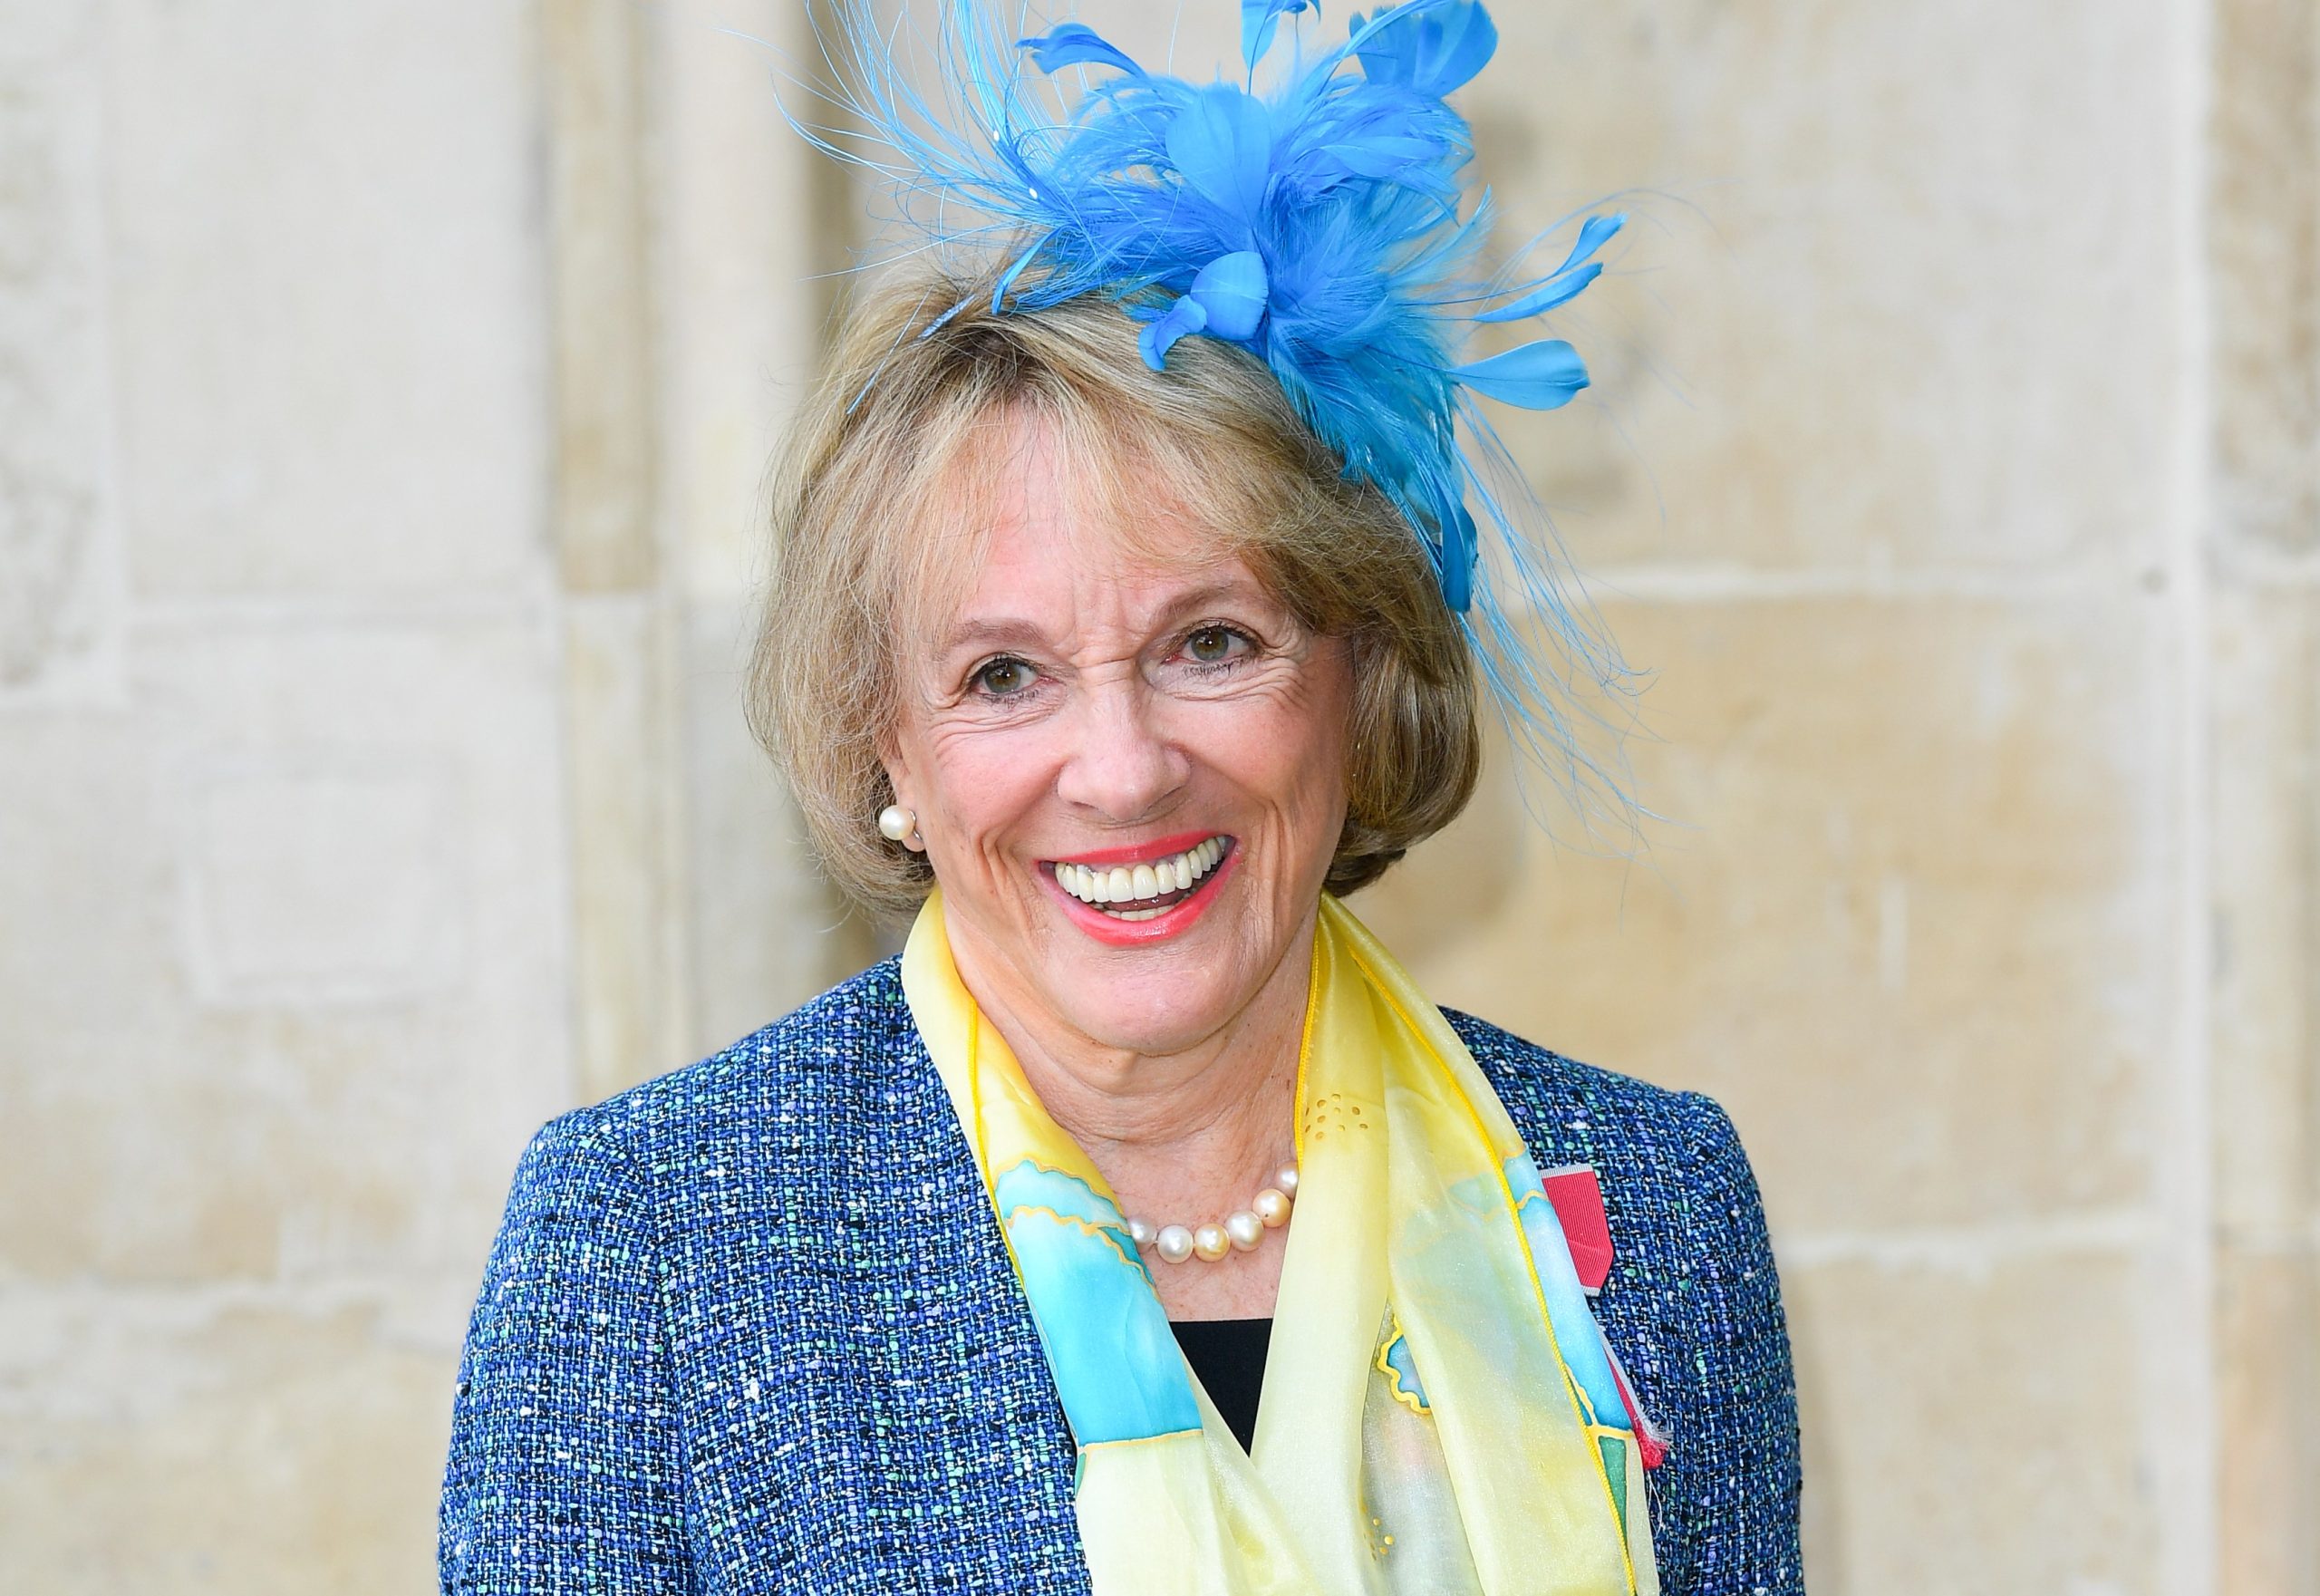 Dame Esther Rantzen, who has terminal cancer, has prompted a renewed debate about the issue